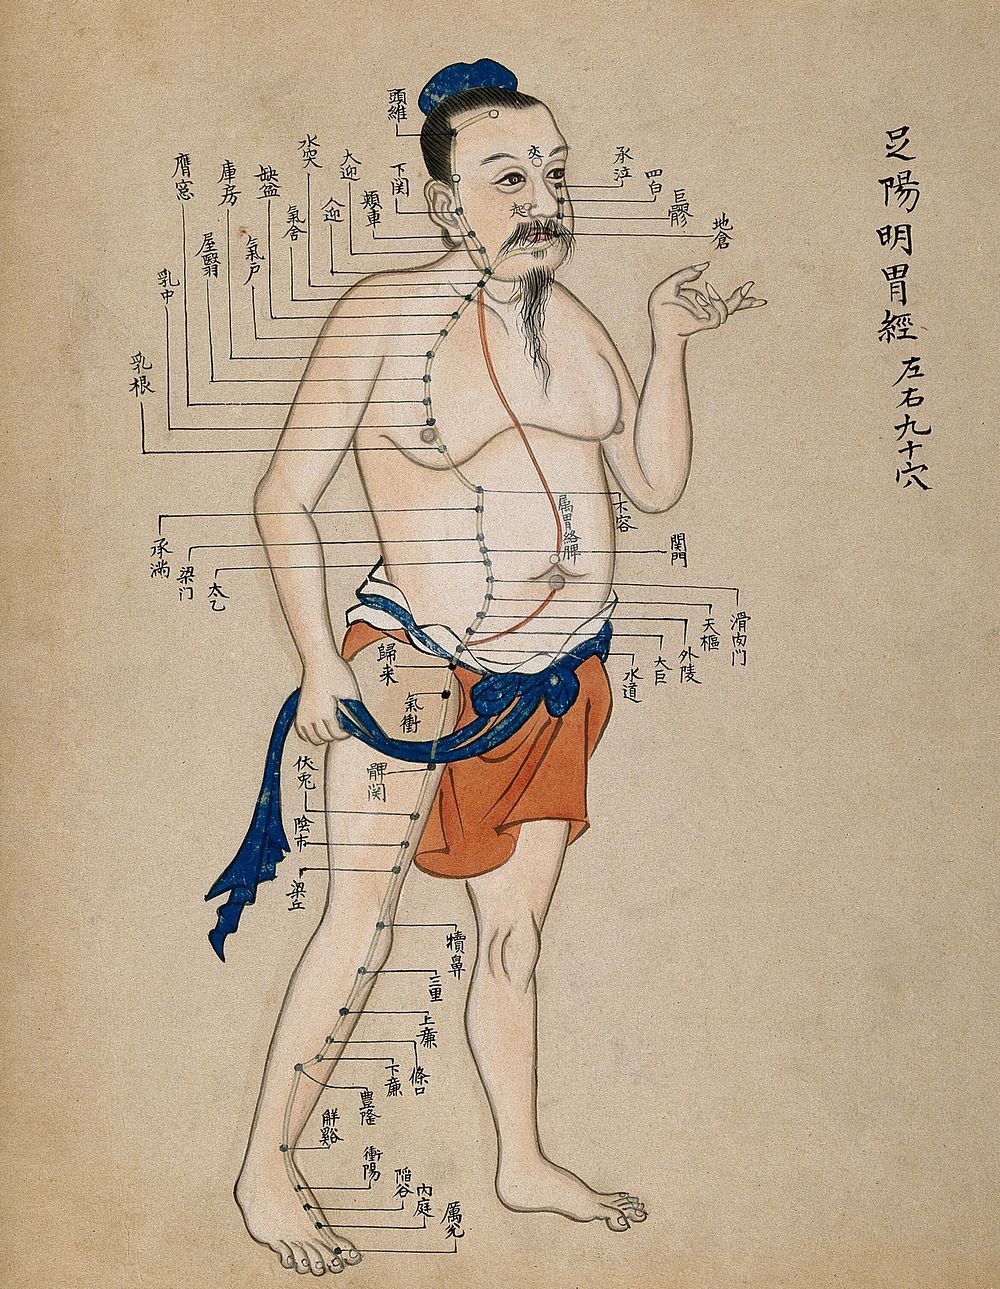 Acupuncture chart with a series of points indicated on the figure of a standing Chinese man. Watercolour.